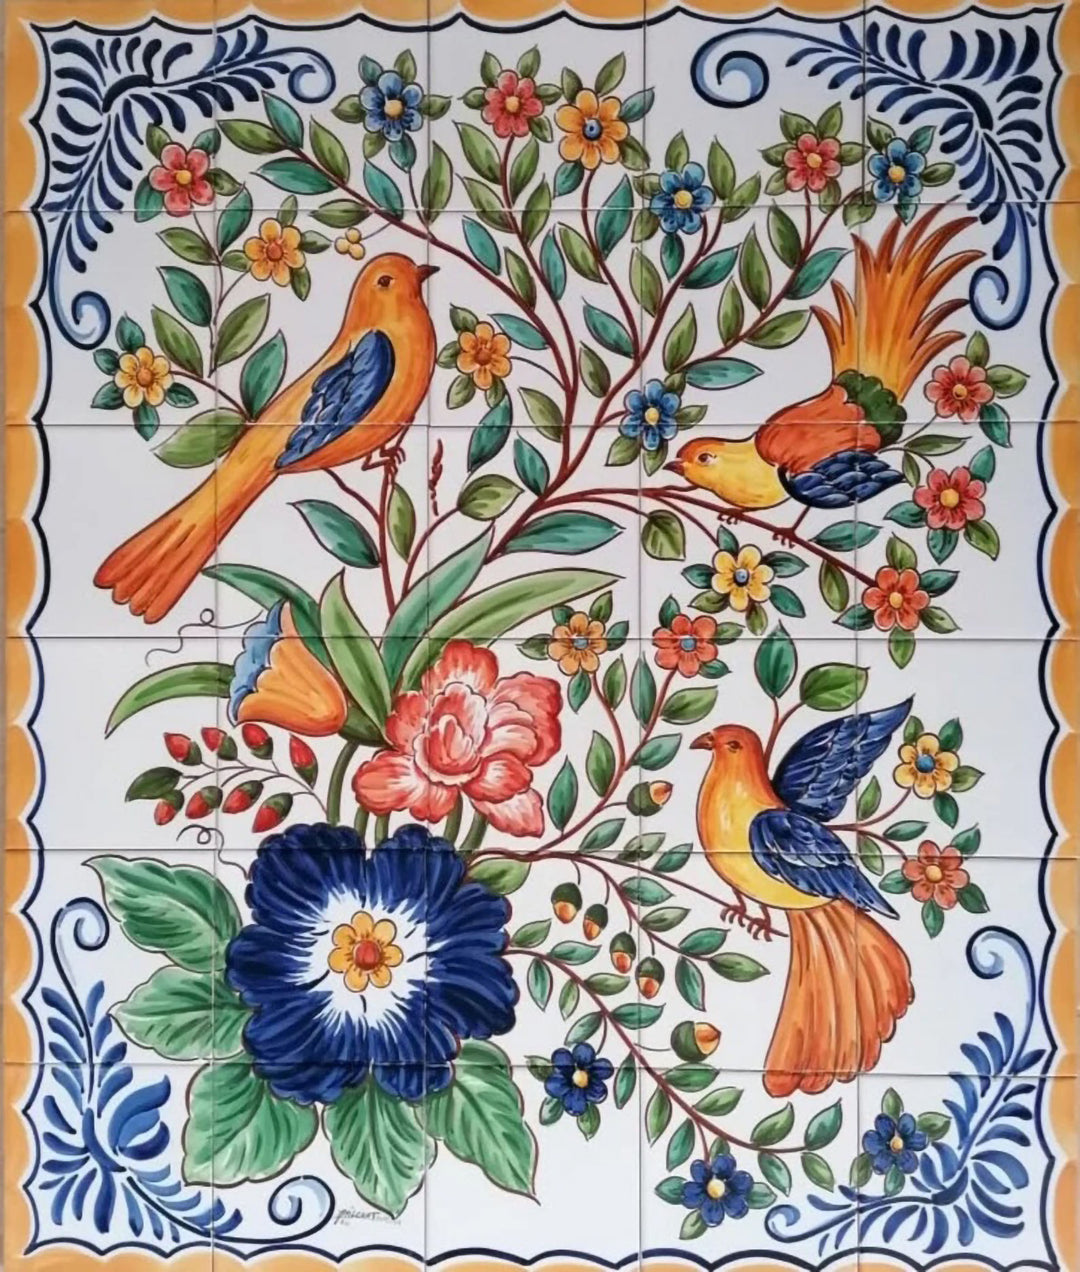 Colourful Flowers and Birds Tile Mural - Hand Painted Portuguese Tiles | Ref. PT363